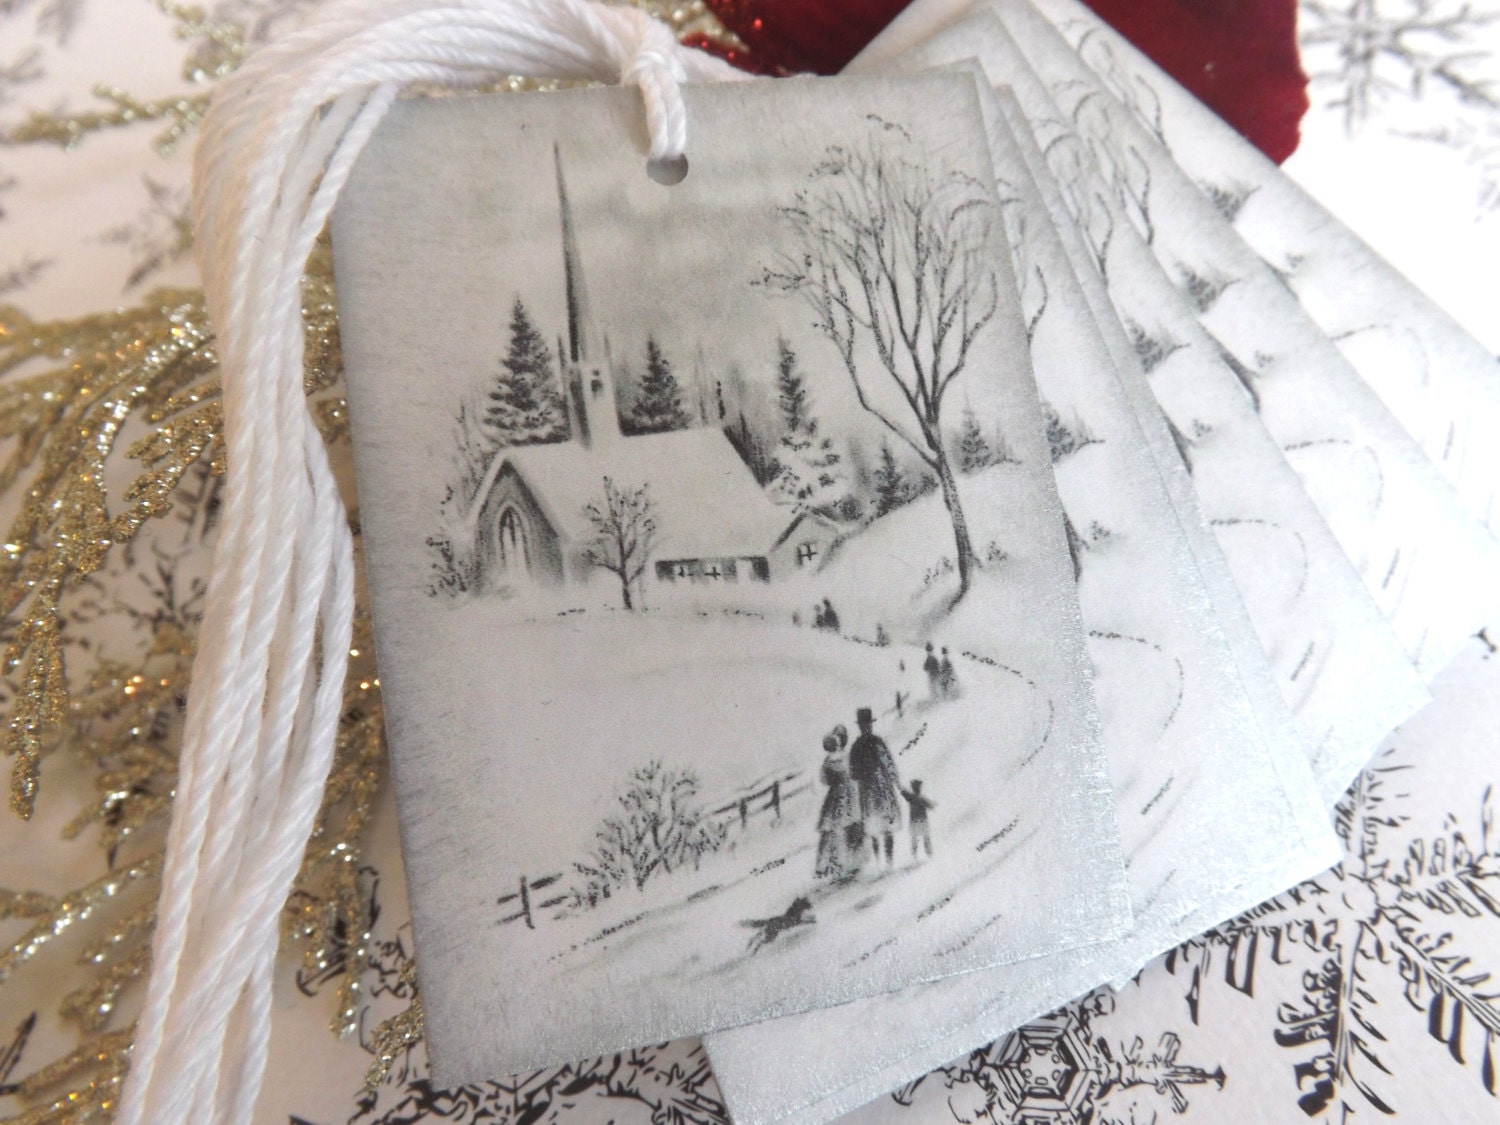 White and Silver Snowy Church Scene Christmas Gift Tags // Vintage Christmas Image // Set of 6